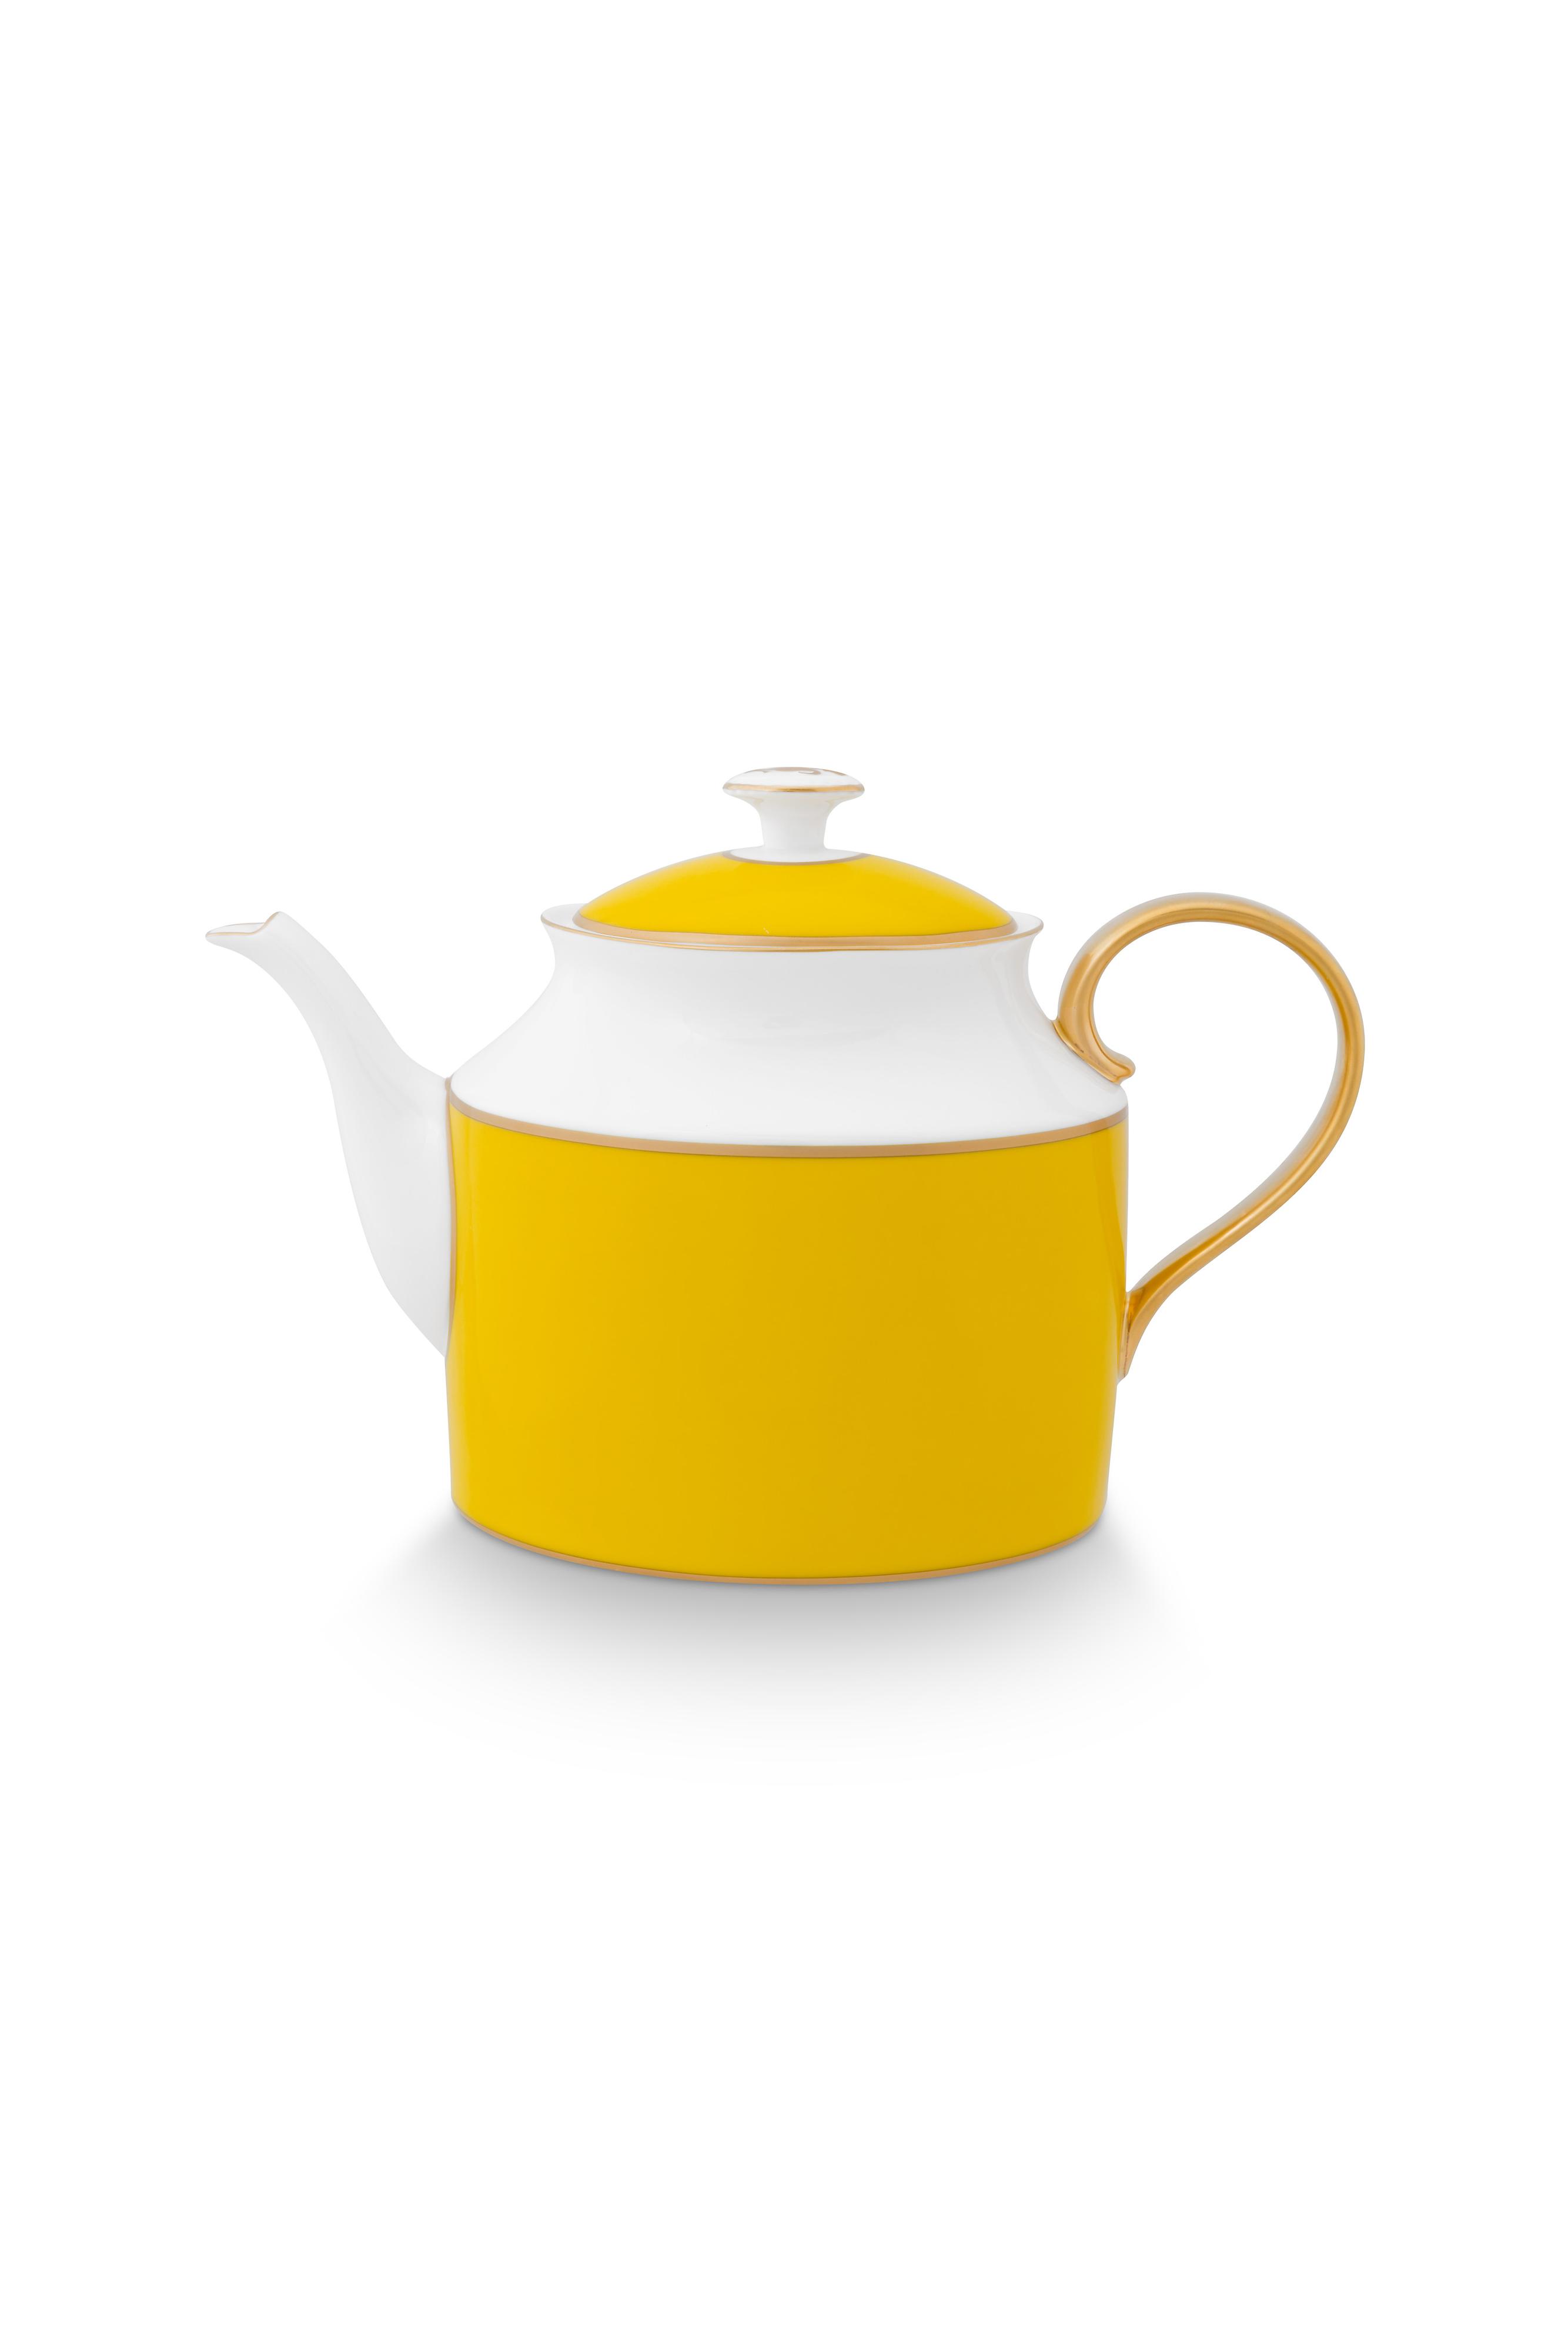 Tea Pot Large Pip Chique Gold-yellow 1.8ltr Gift